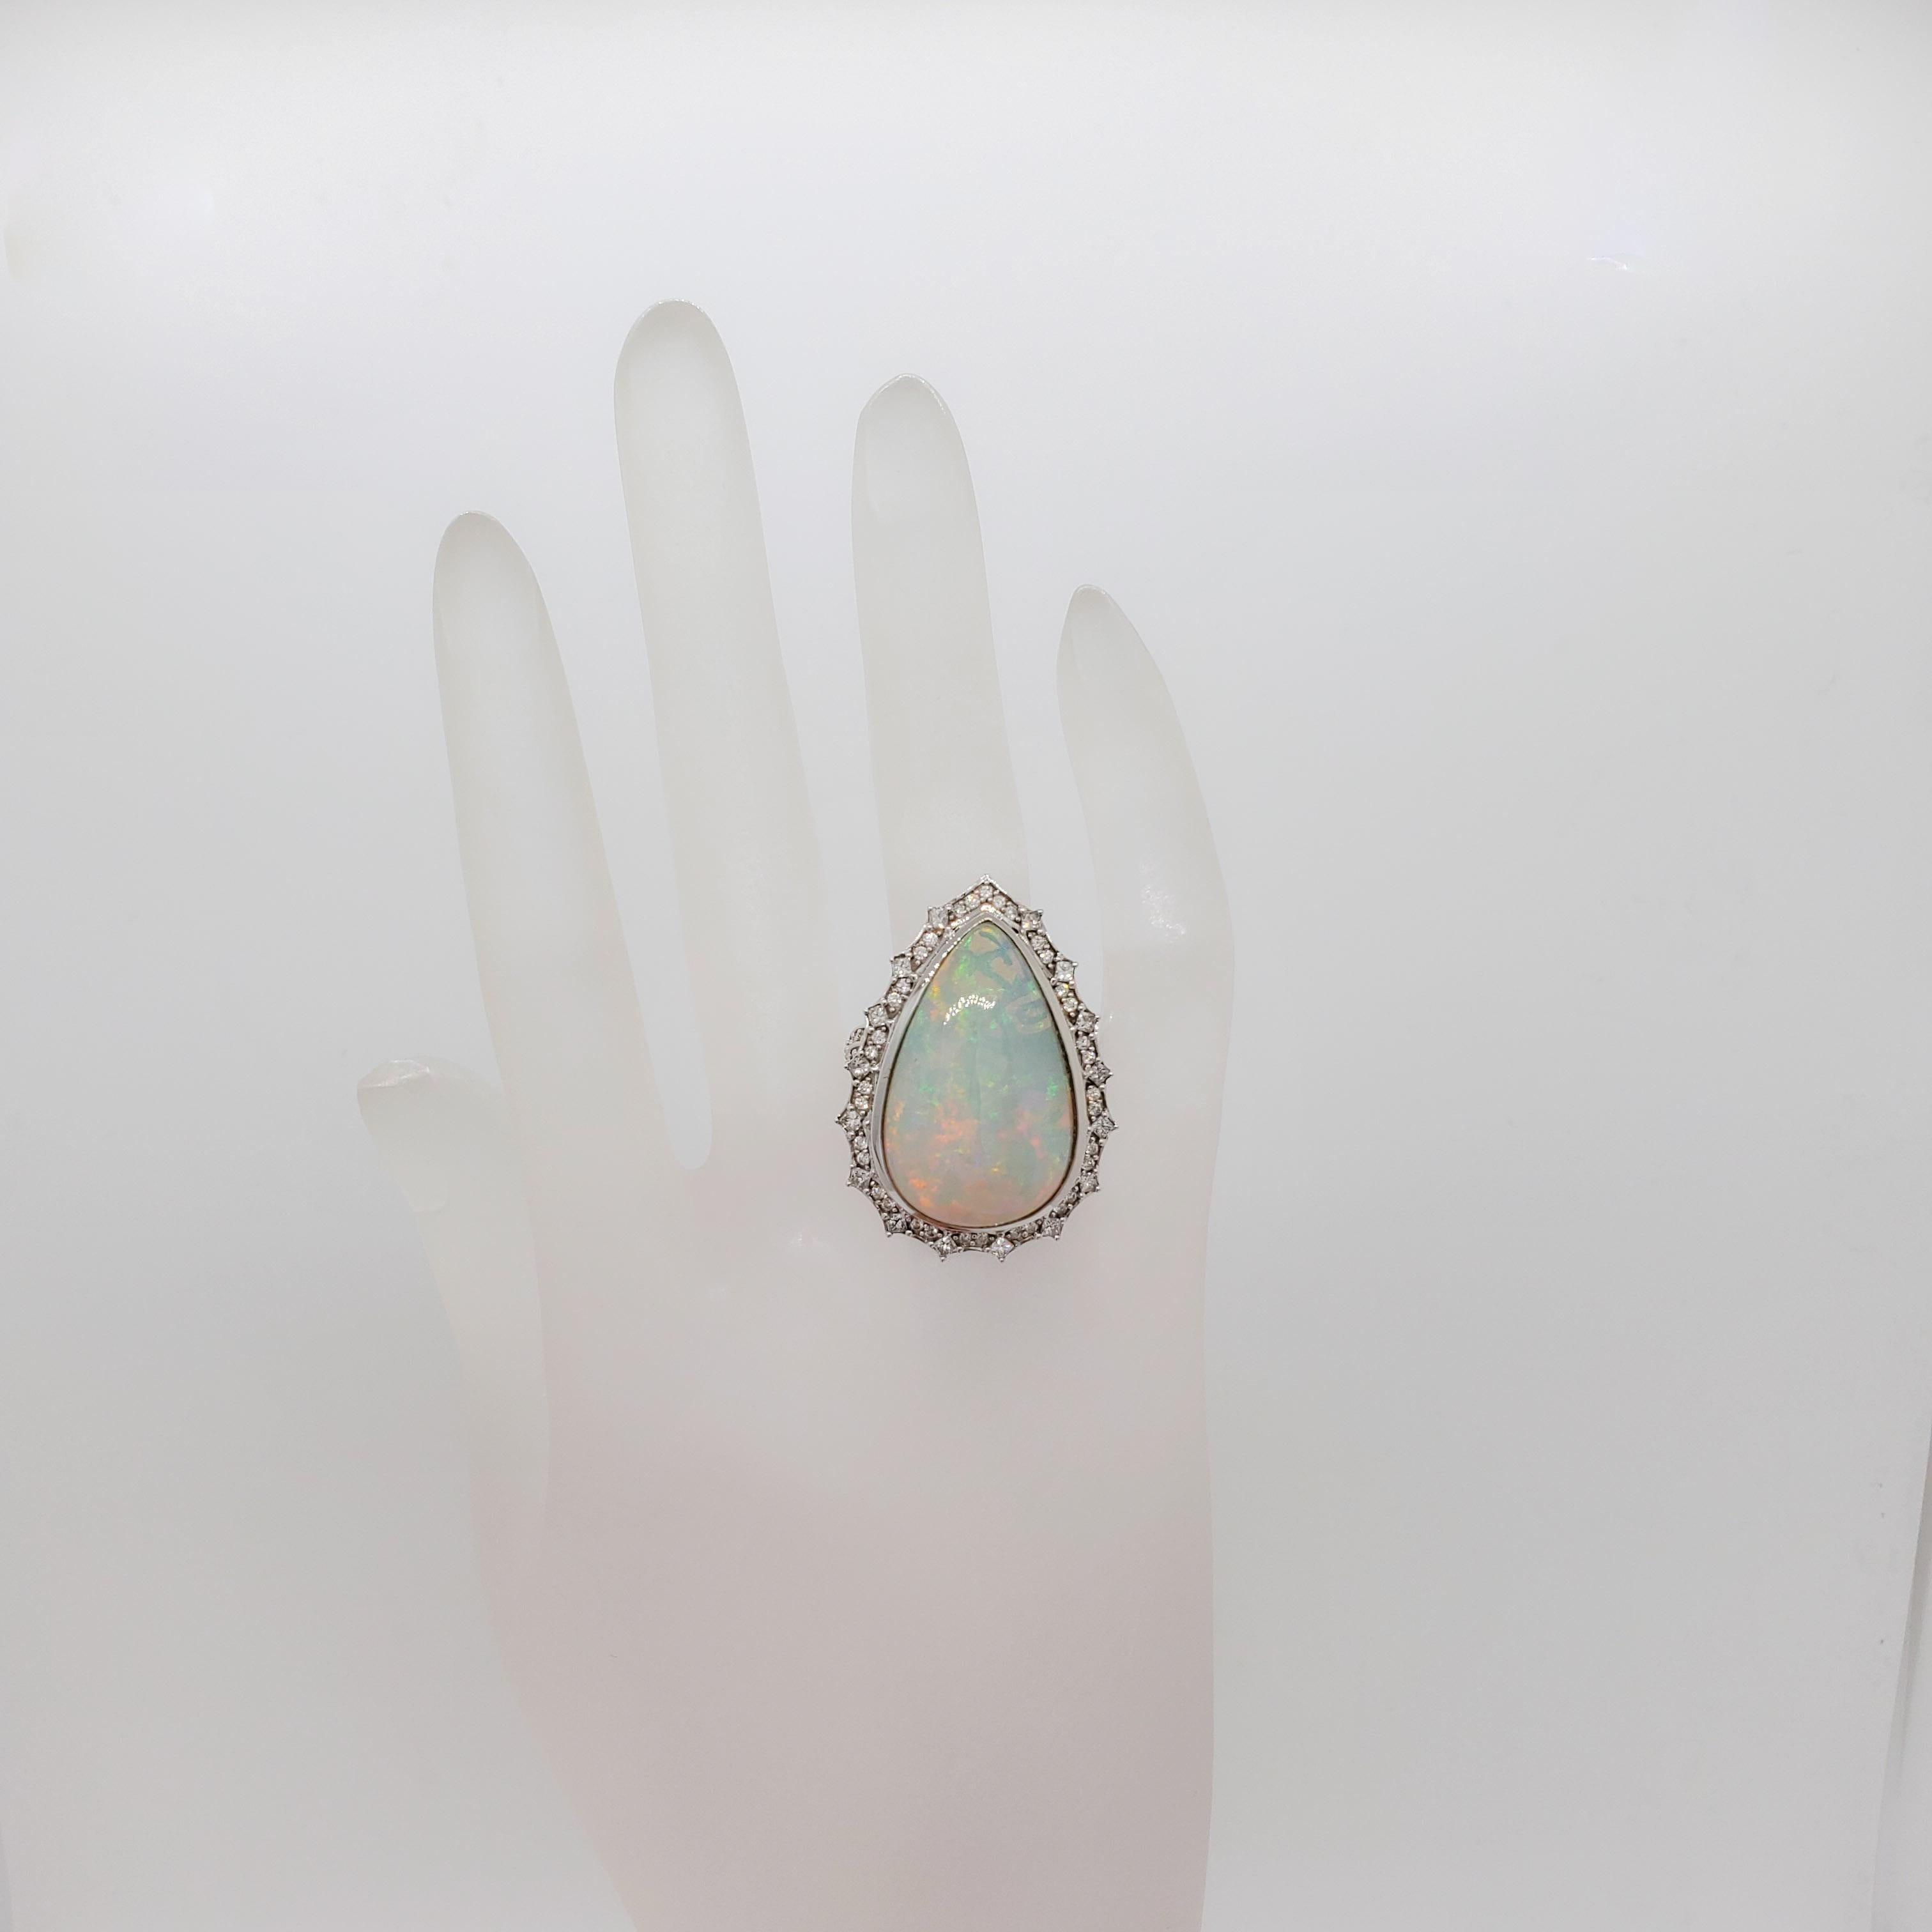 Black Opal Pear Shape and White Diamond Cocktail Ring in 18k White Gold 2